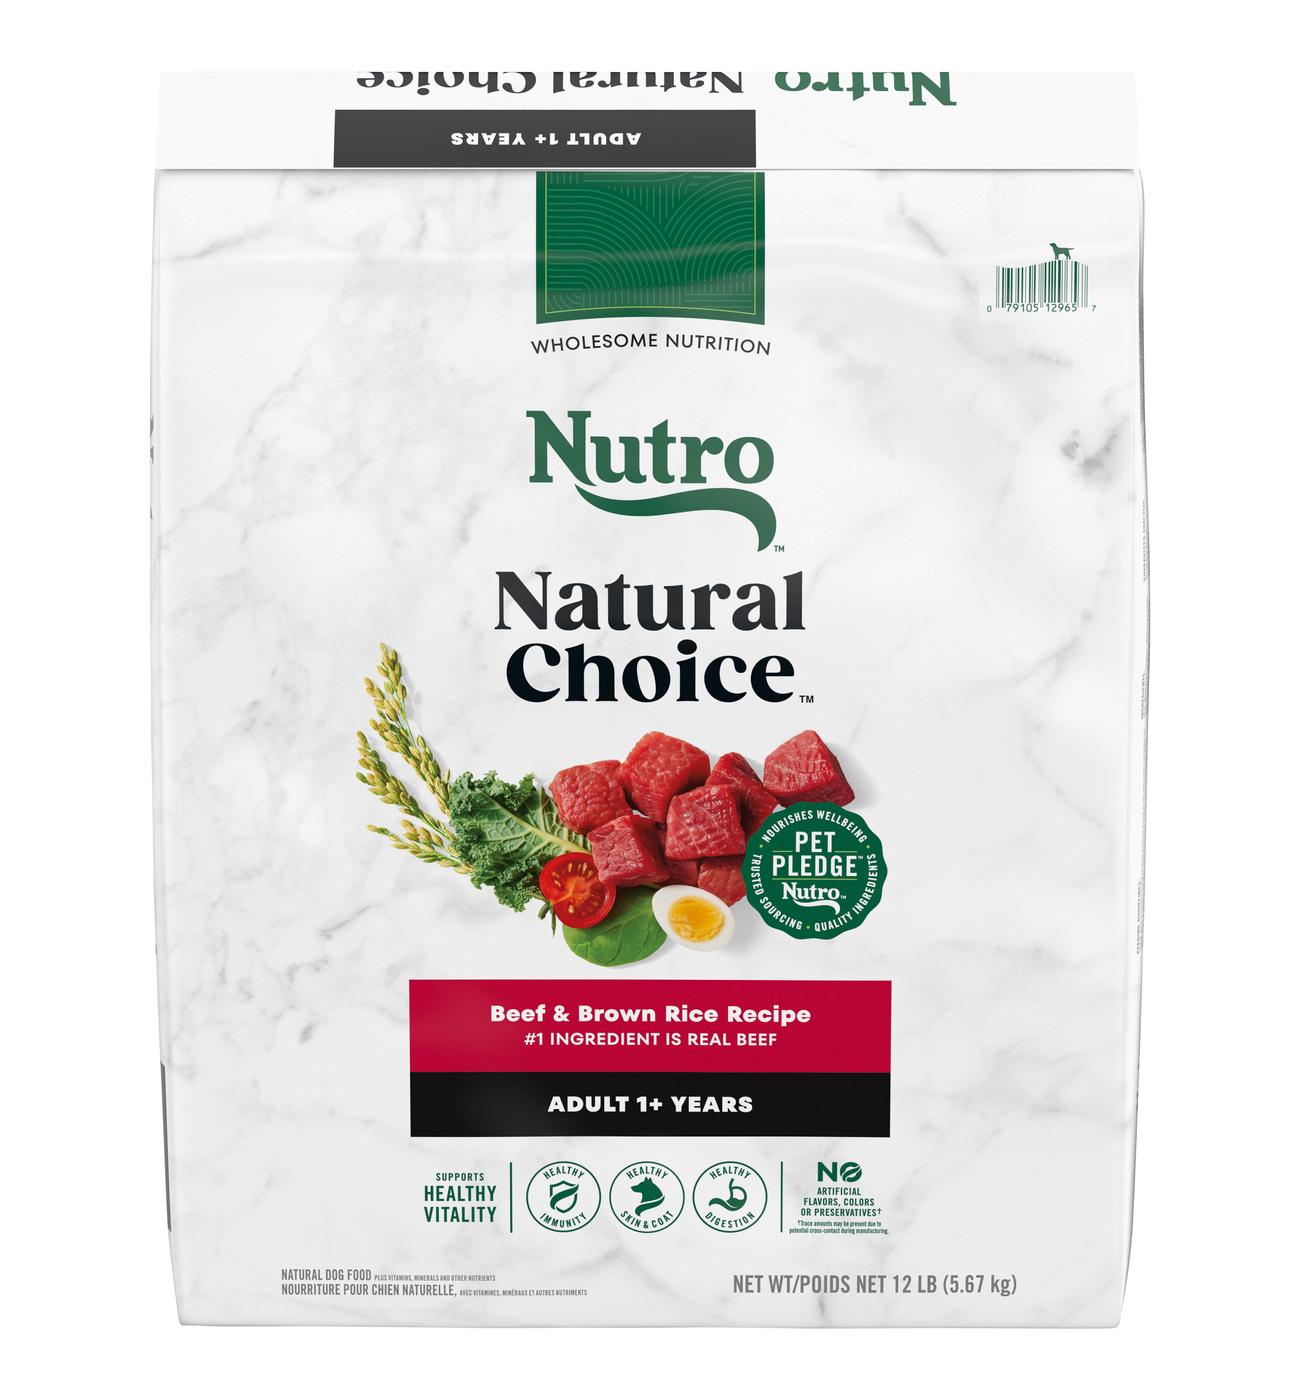 Nutro Natural Choice Adult Beef & Brown Rice Dry Dog Food; image 1 of 5